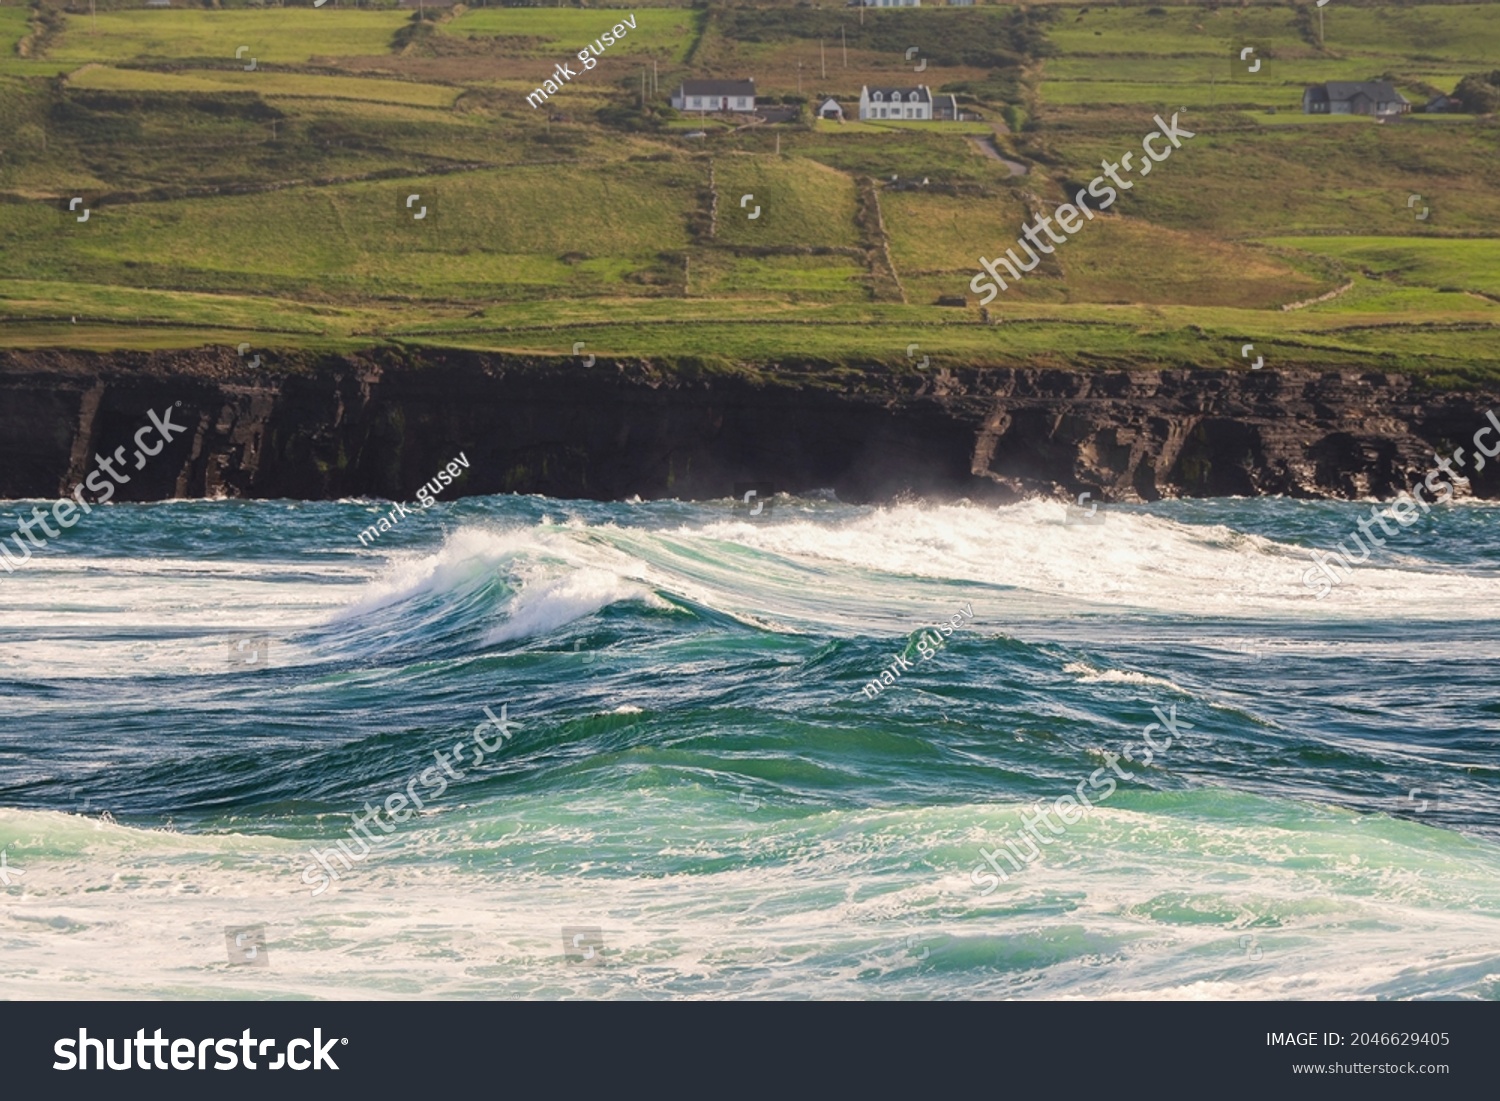 Powerful waves crushing against Cliffs and rough stone coastline of West coast of Ireland. Doolin area. County Clare. Ocean power and rugged Irish coastline. Green fields in the background #2046629405